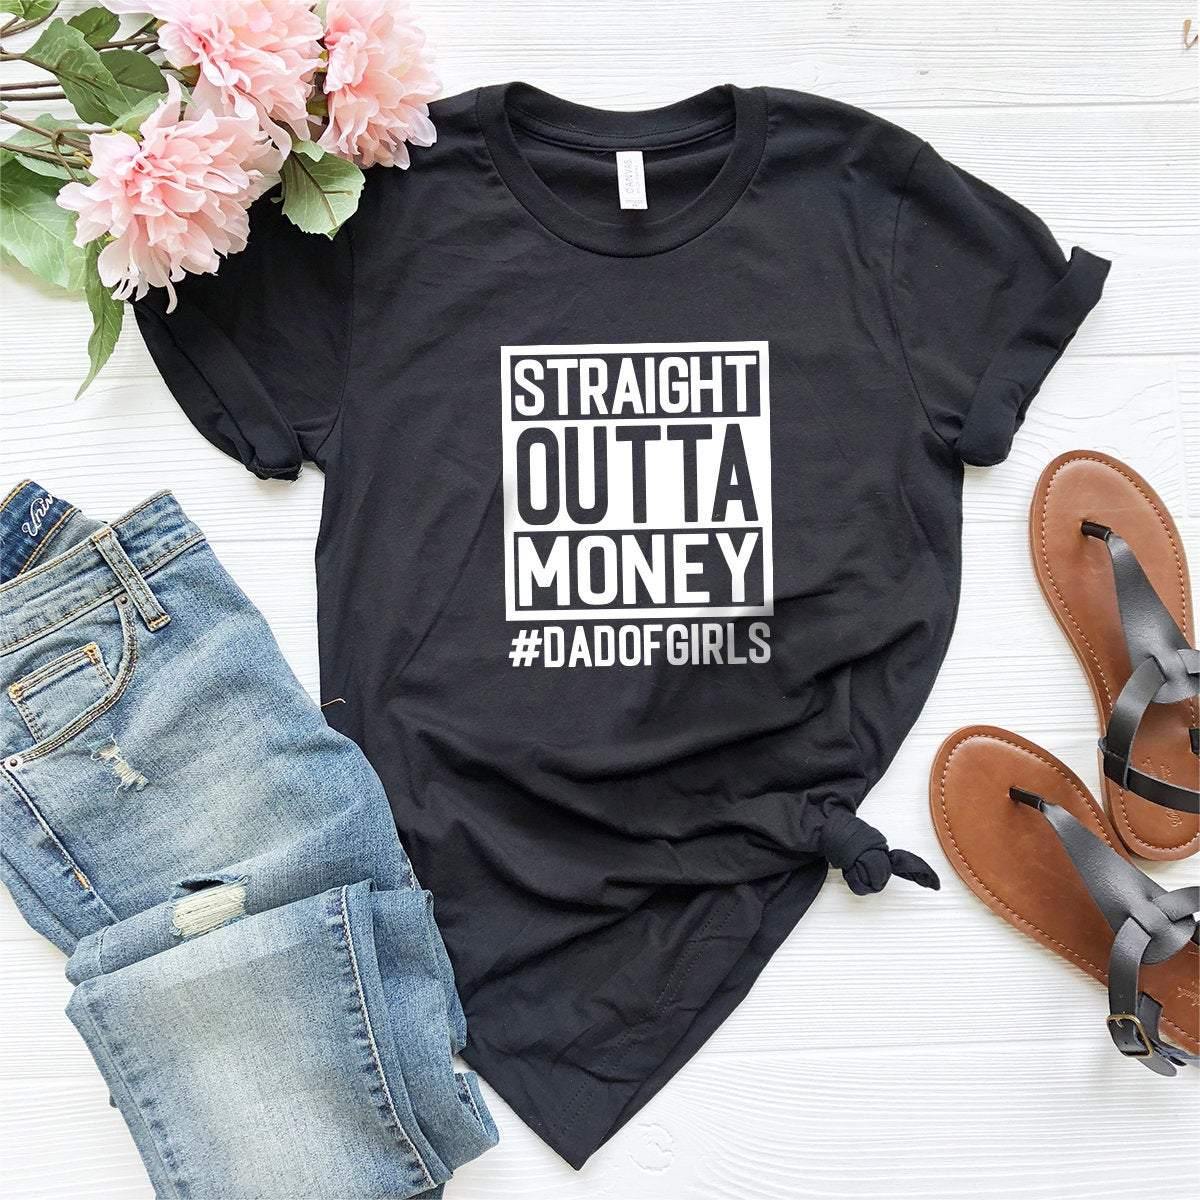 Funny Dad Tshirt, Gift For Dad , Funny Father Tee, Straight Outta Money Shirt - Fastdeliverytees.com